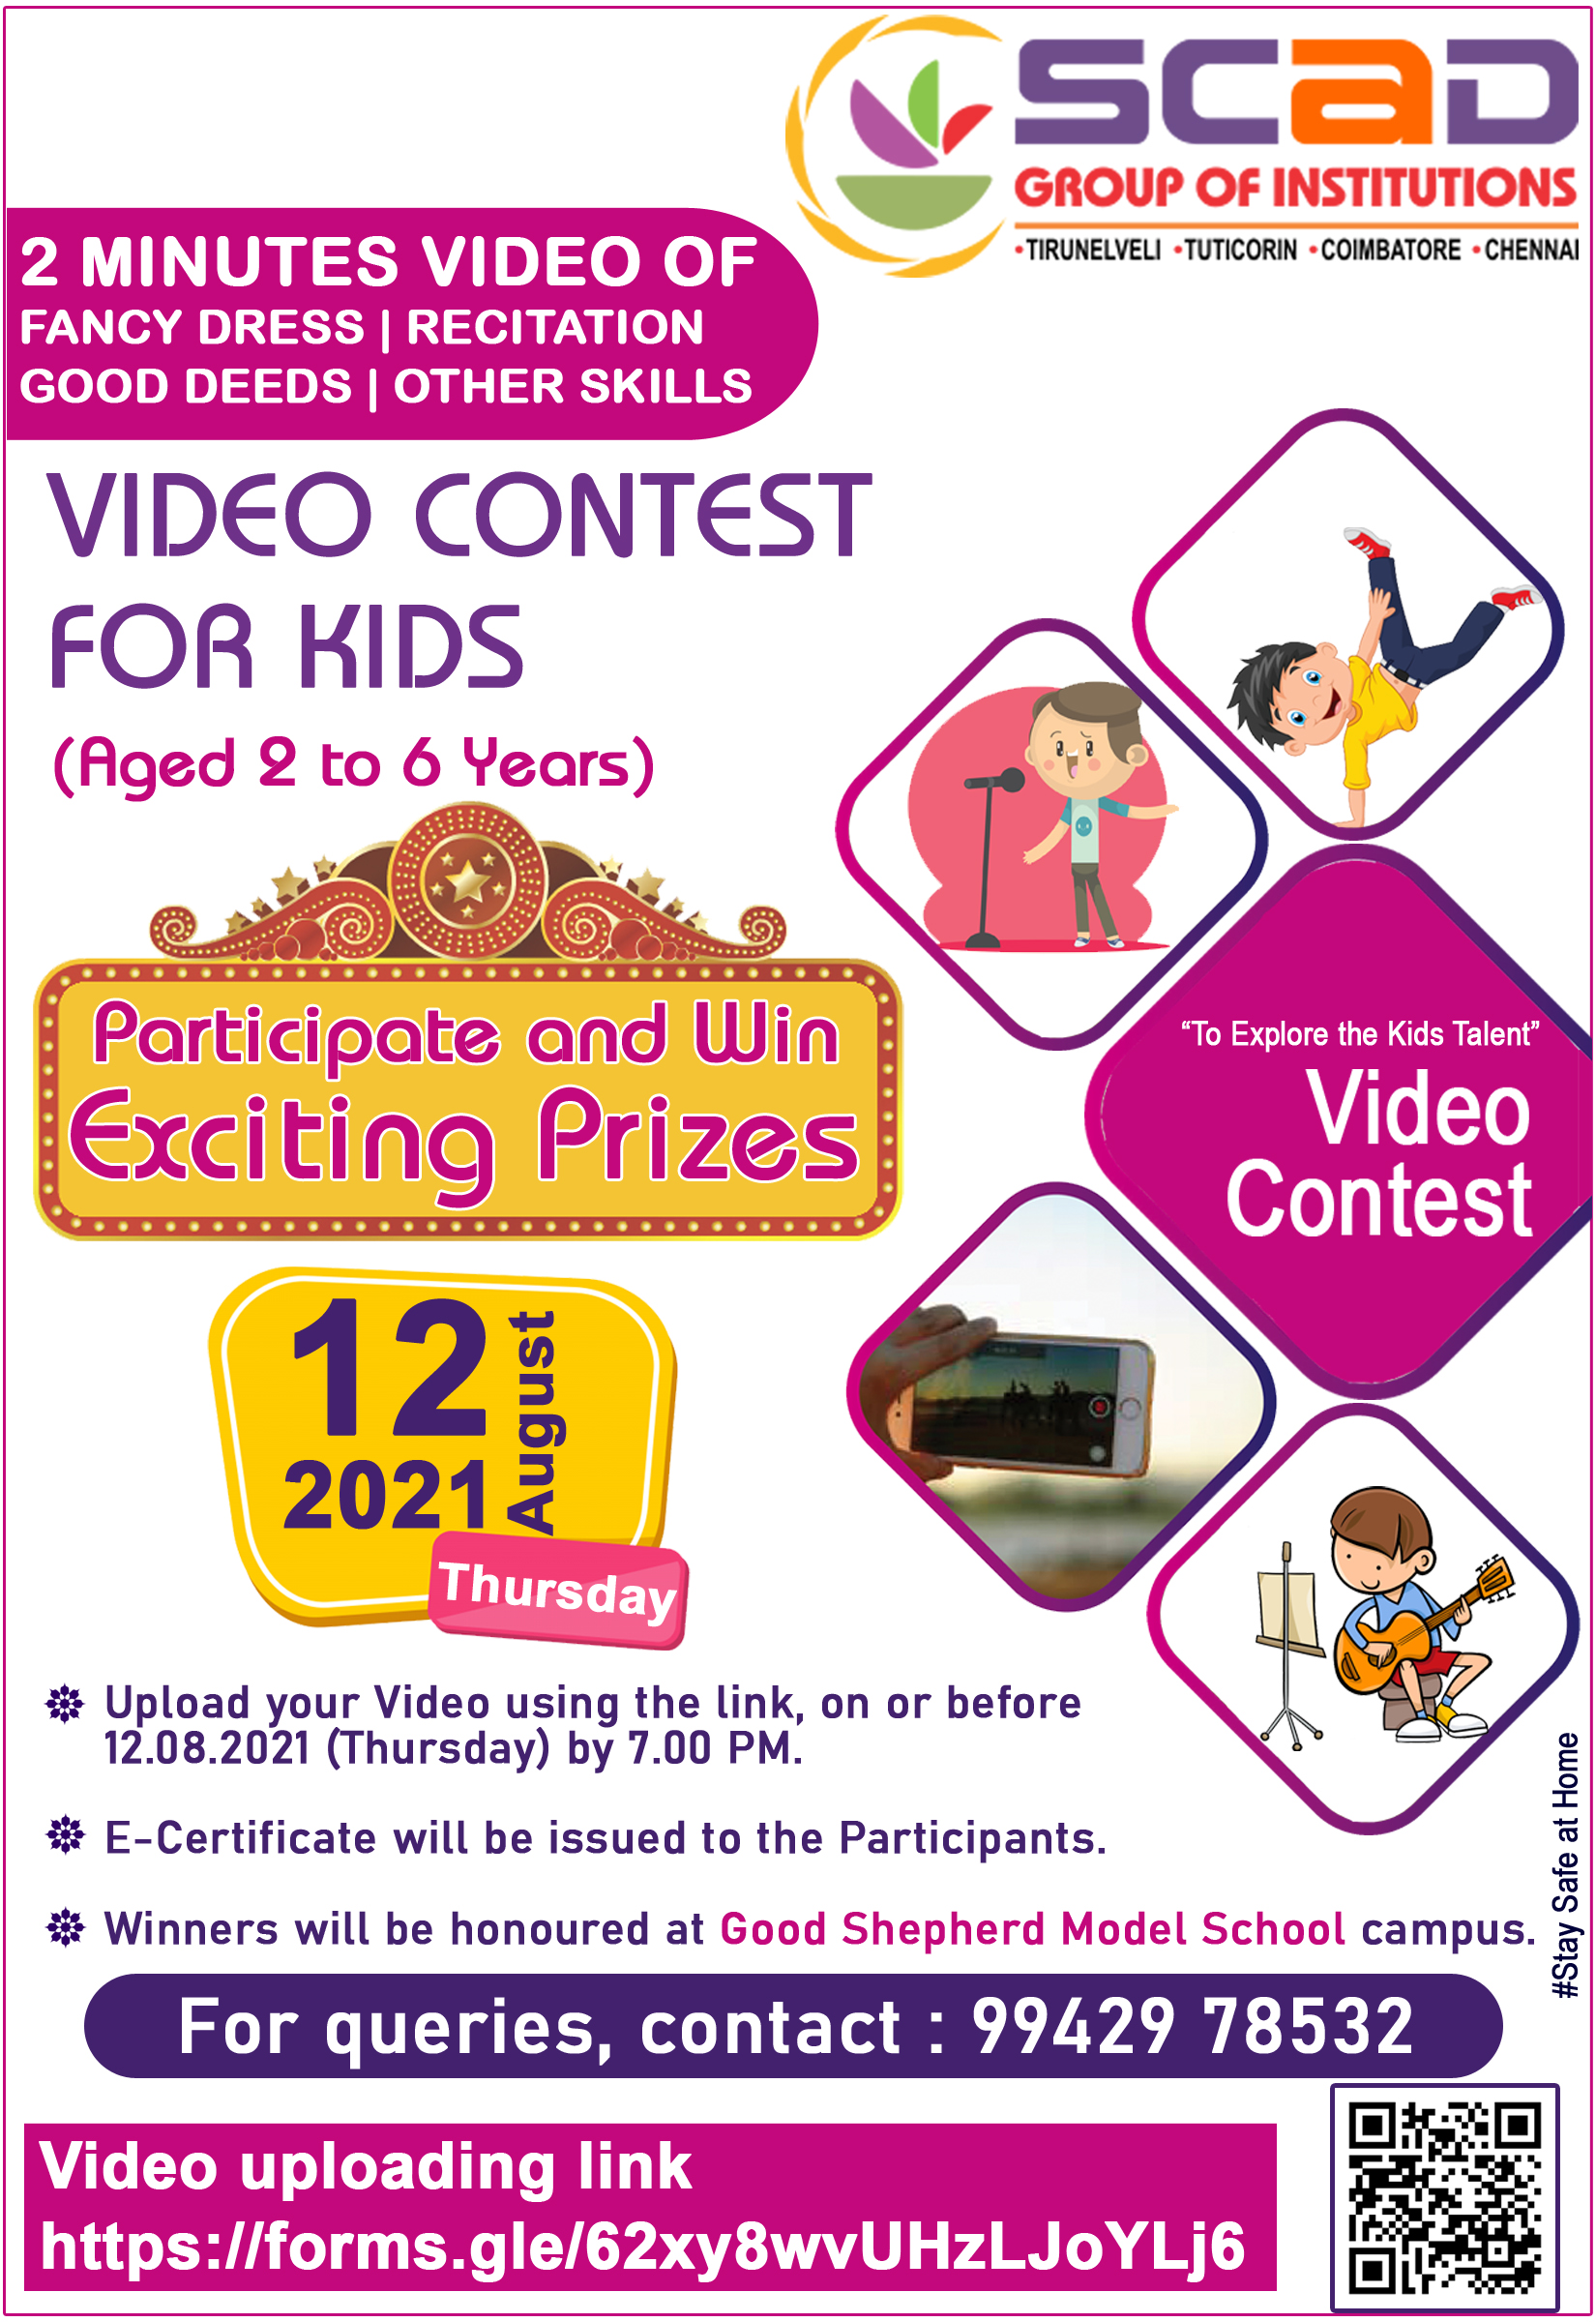 VIDEO CONTEST FOR KIDS 2021